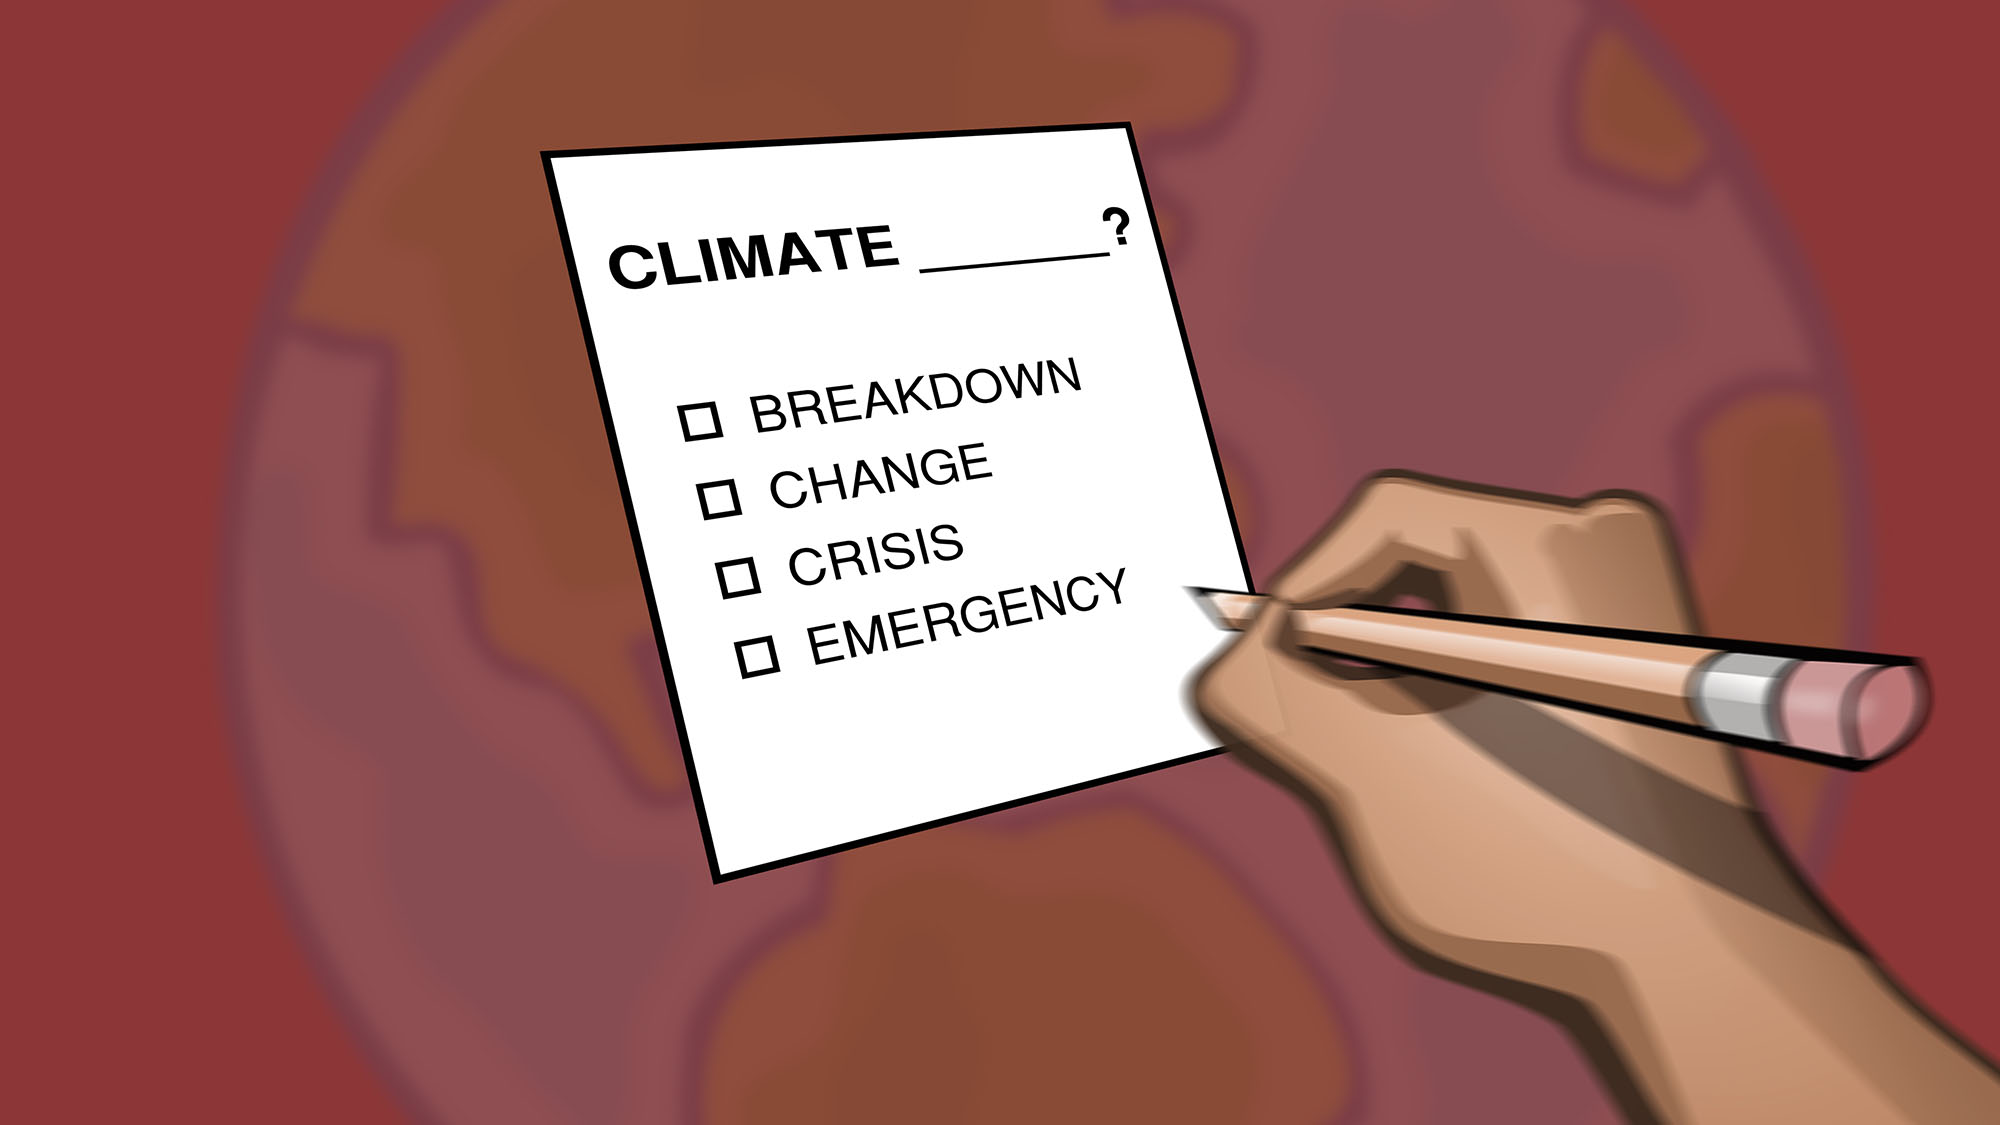 A person is shown deciding between different climate language in a photo illustration.